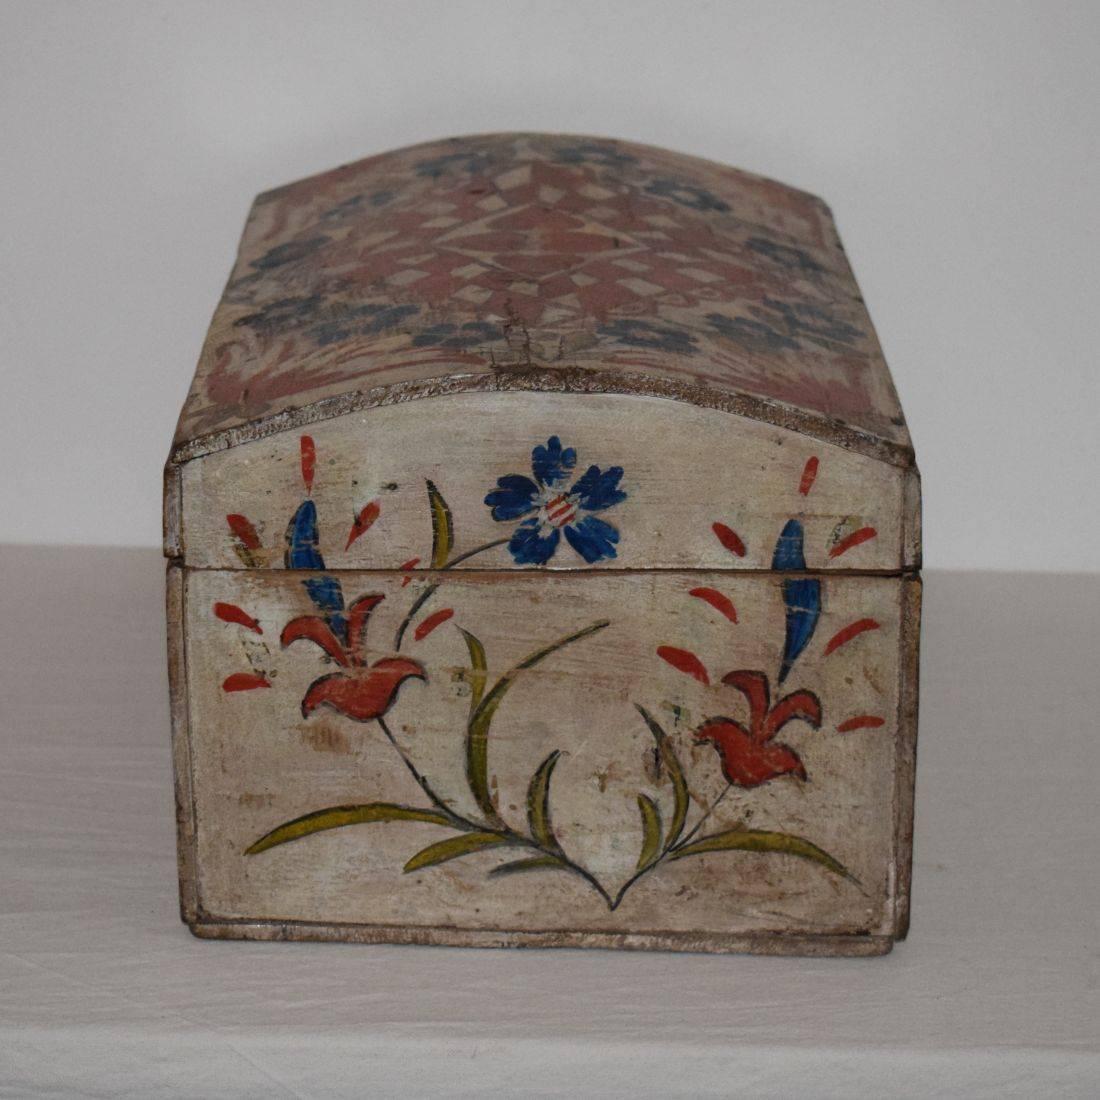 Wood 19th Century French Folk Art Weddingbox from Normandy with Hearts